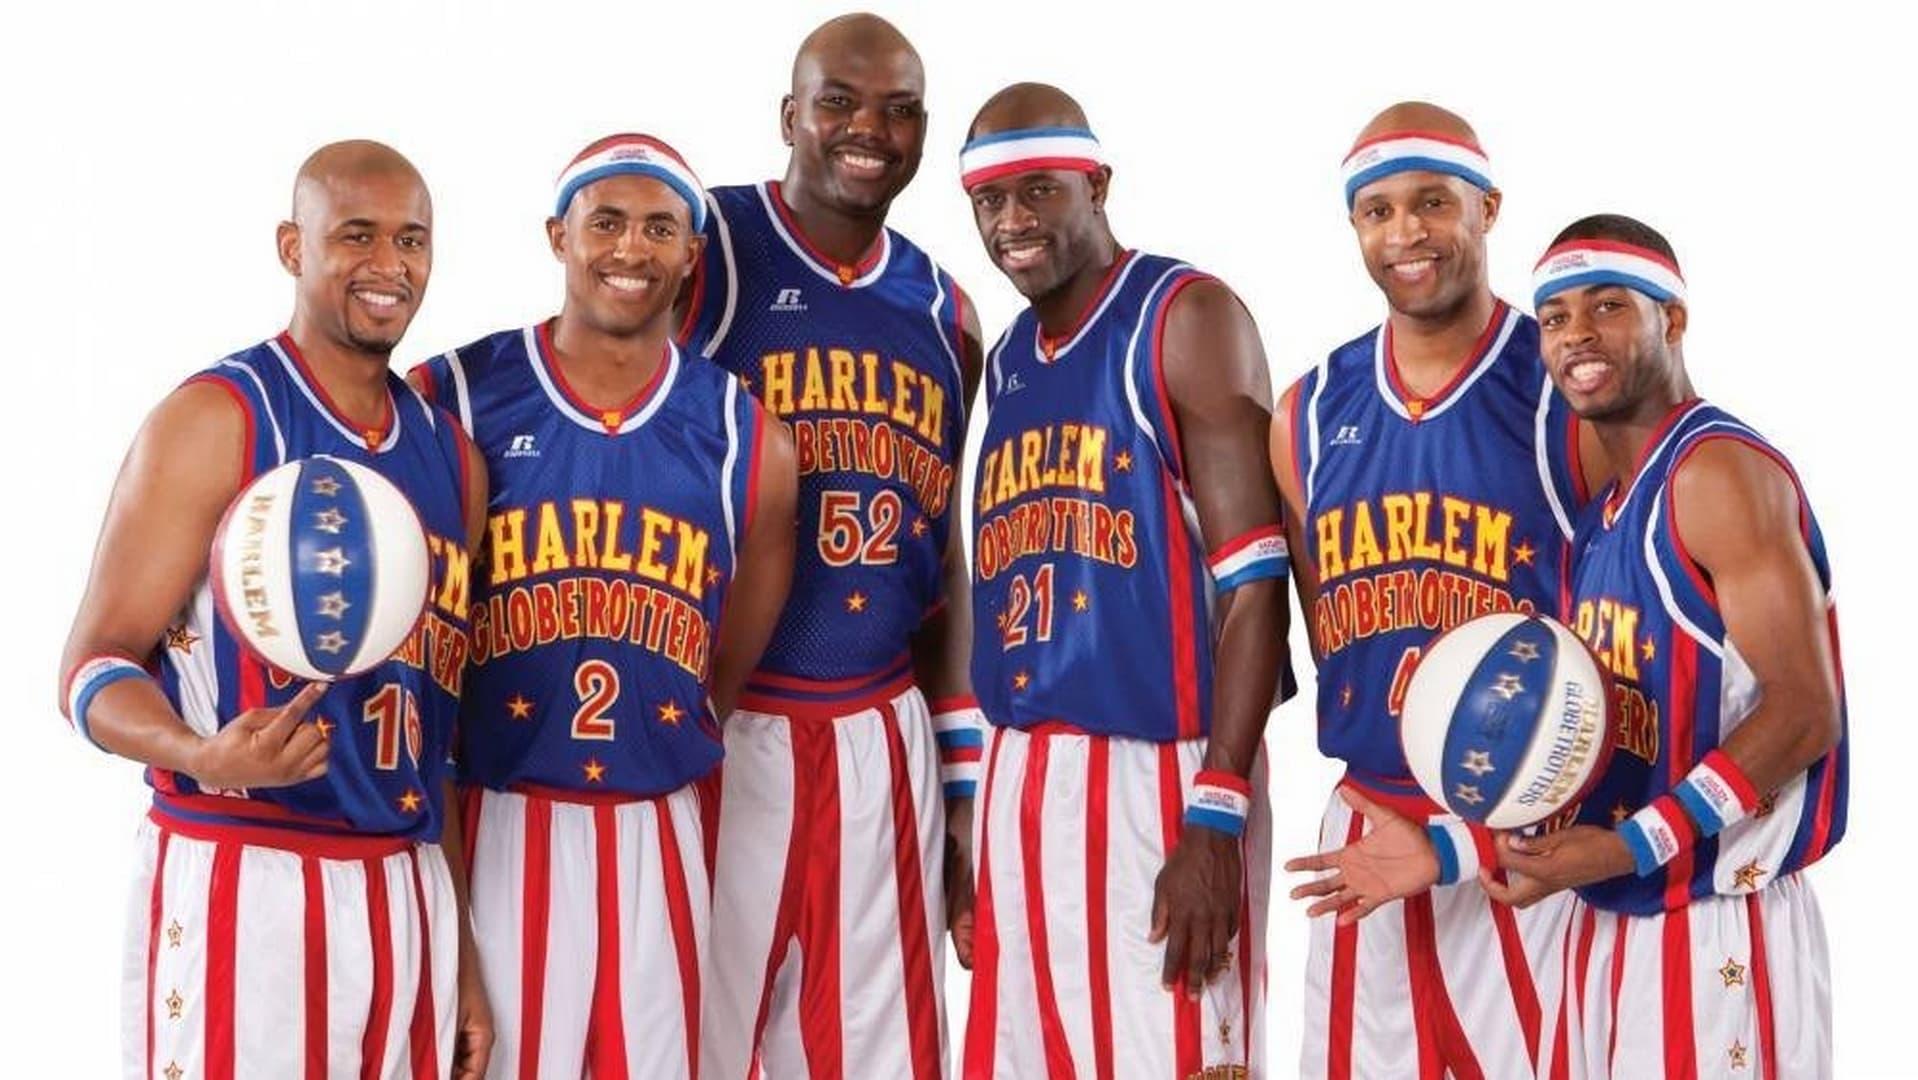 The Harlem Globetrotters: The Team That Changed the World backdrop